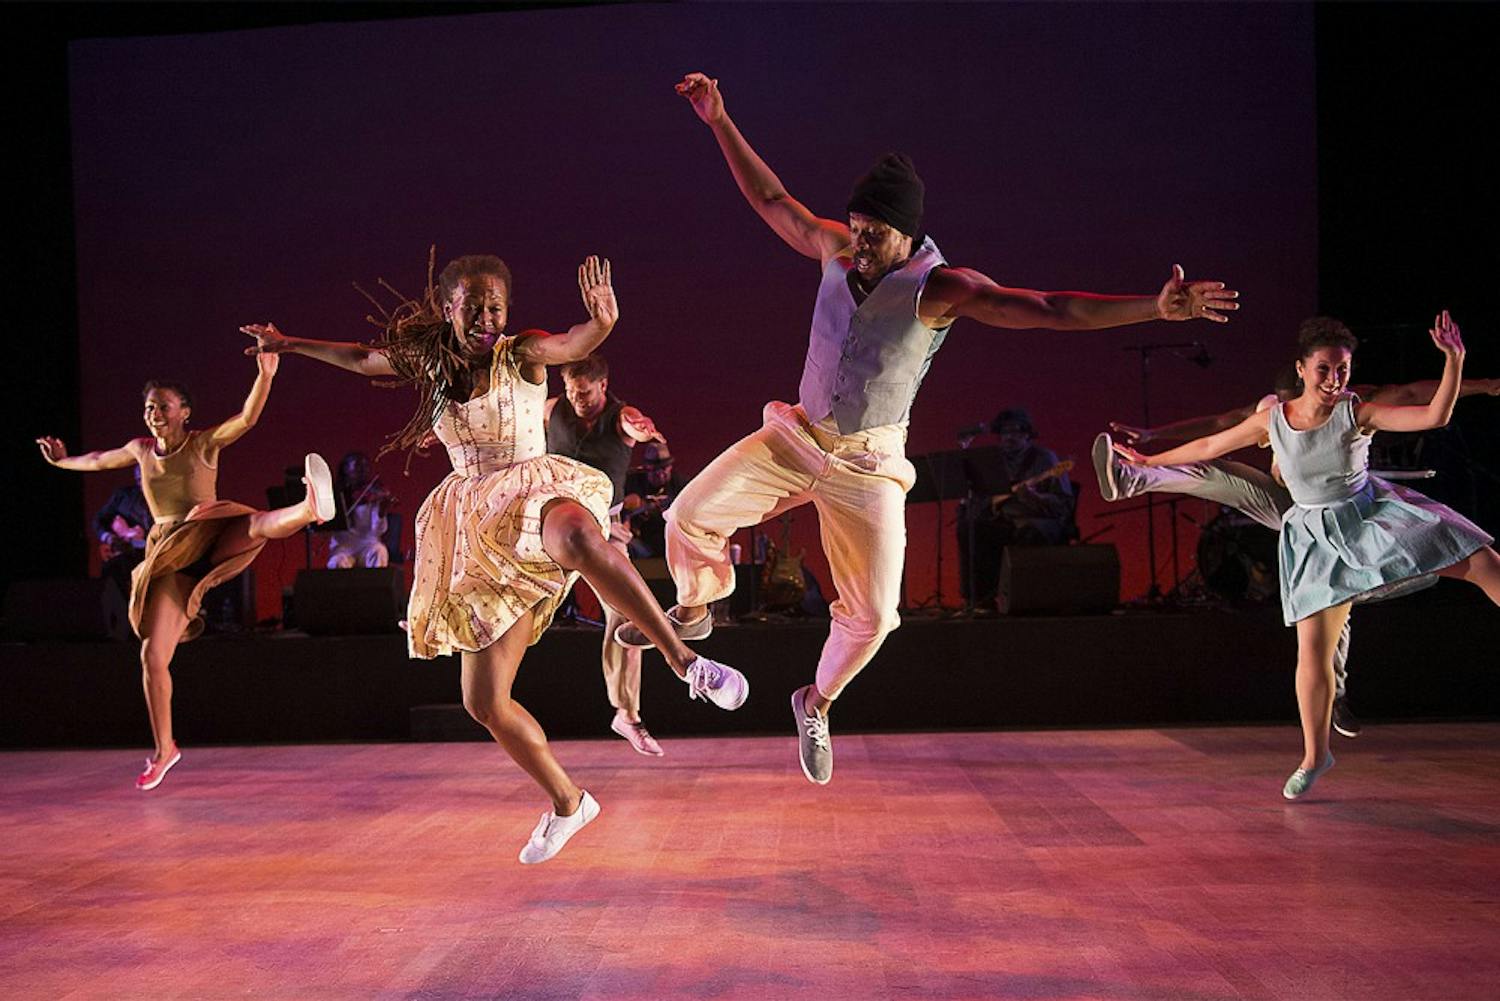 Performers with the Dorrance Dance / New York dance group will take the stage alongside BIGLovely to present The Blues Project at Memorial Hall at 7:30 p.m. tonight and 8 p.m. Friday.Courtesy of Dorrance Dance.